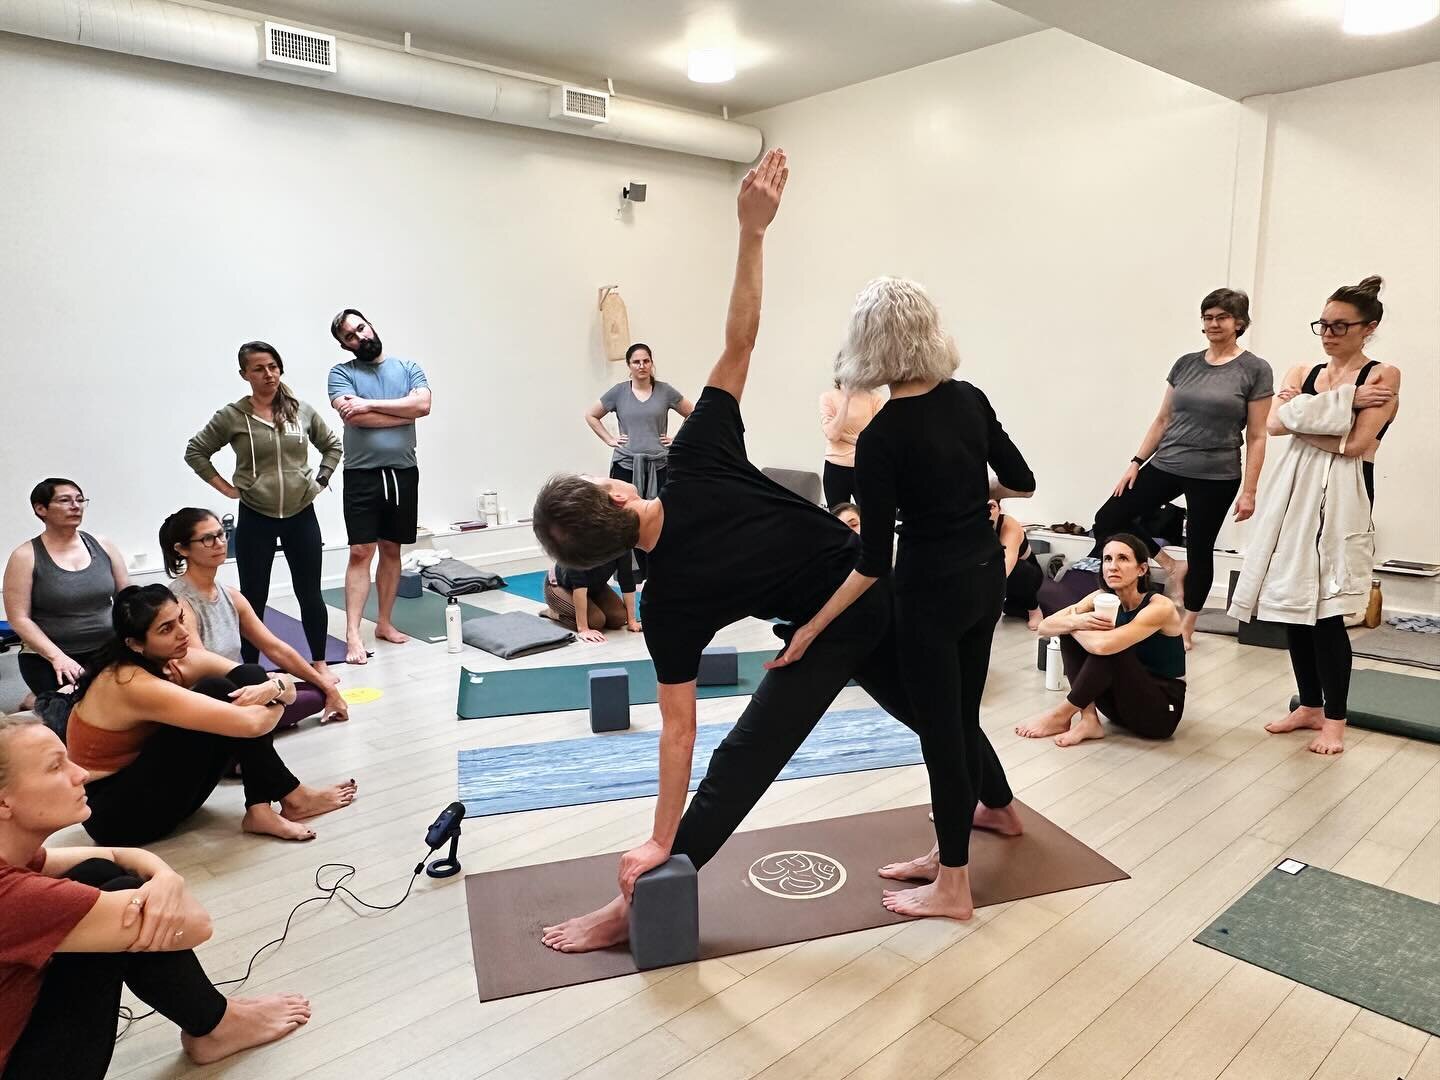 The second weekend of @anniecarpentersmartflow 200 HR training kicks off today. We&rsquo;re so excited for the group of yogis in the training!